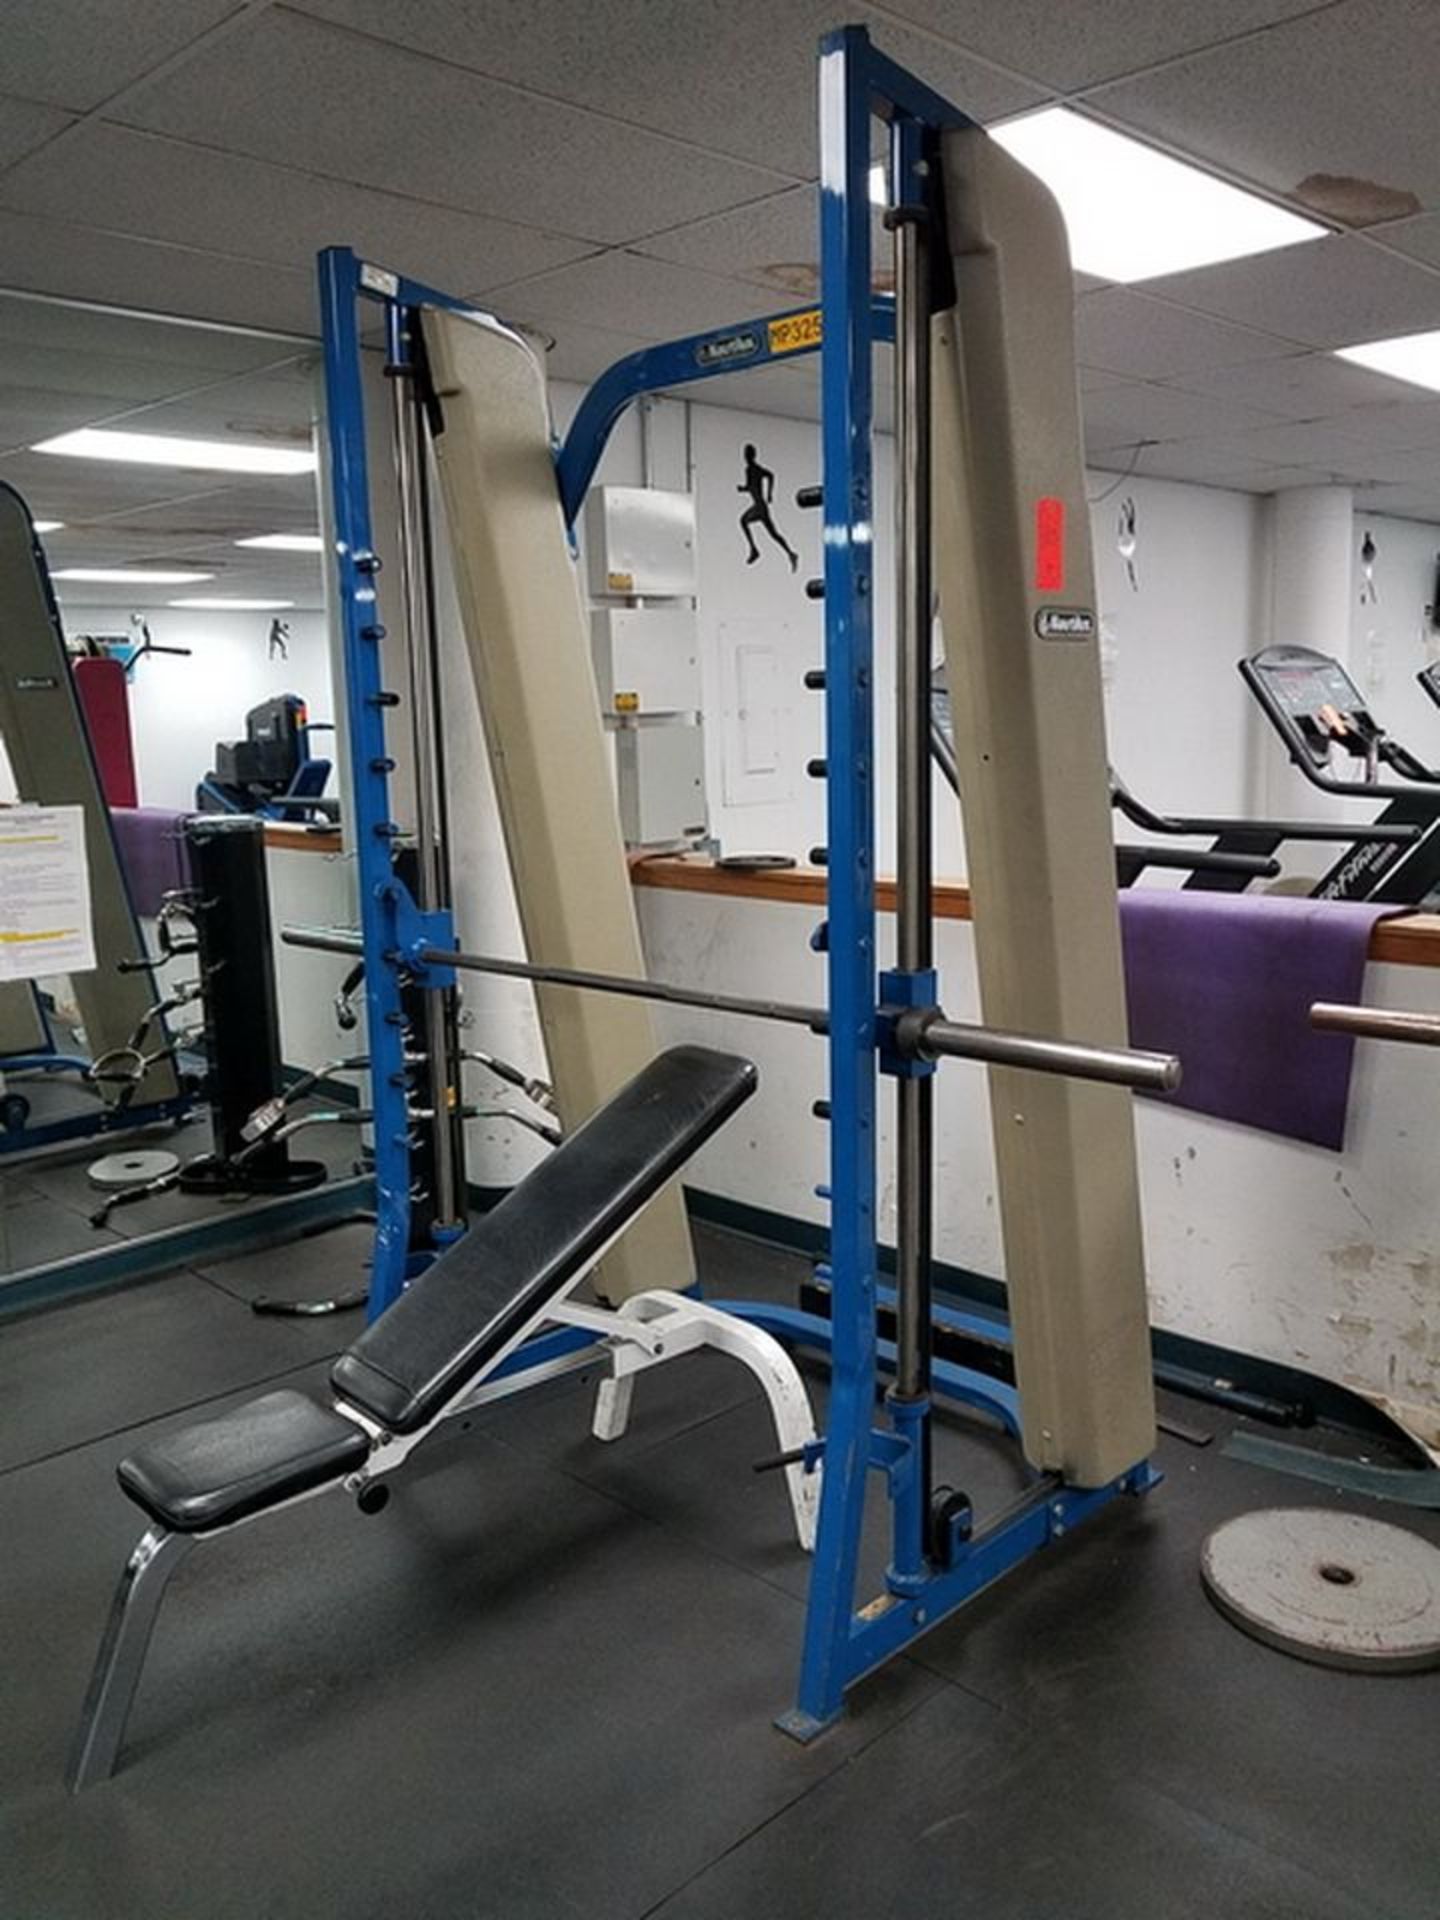 Squat Rack, includes incline bench & bar, no weights. A# 41614 Loc: Basement Fitness Room. (Bsmt